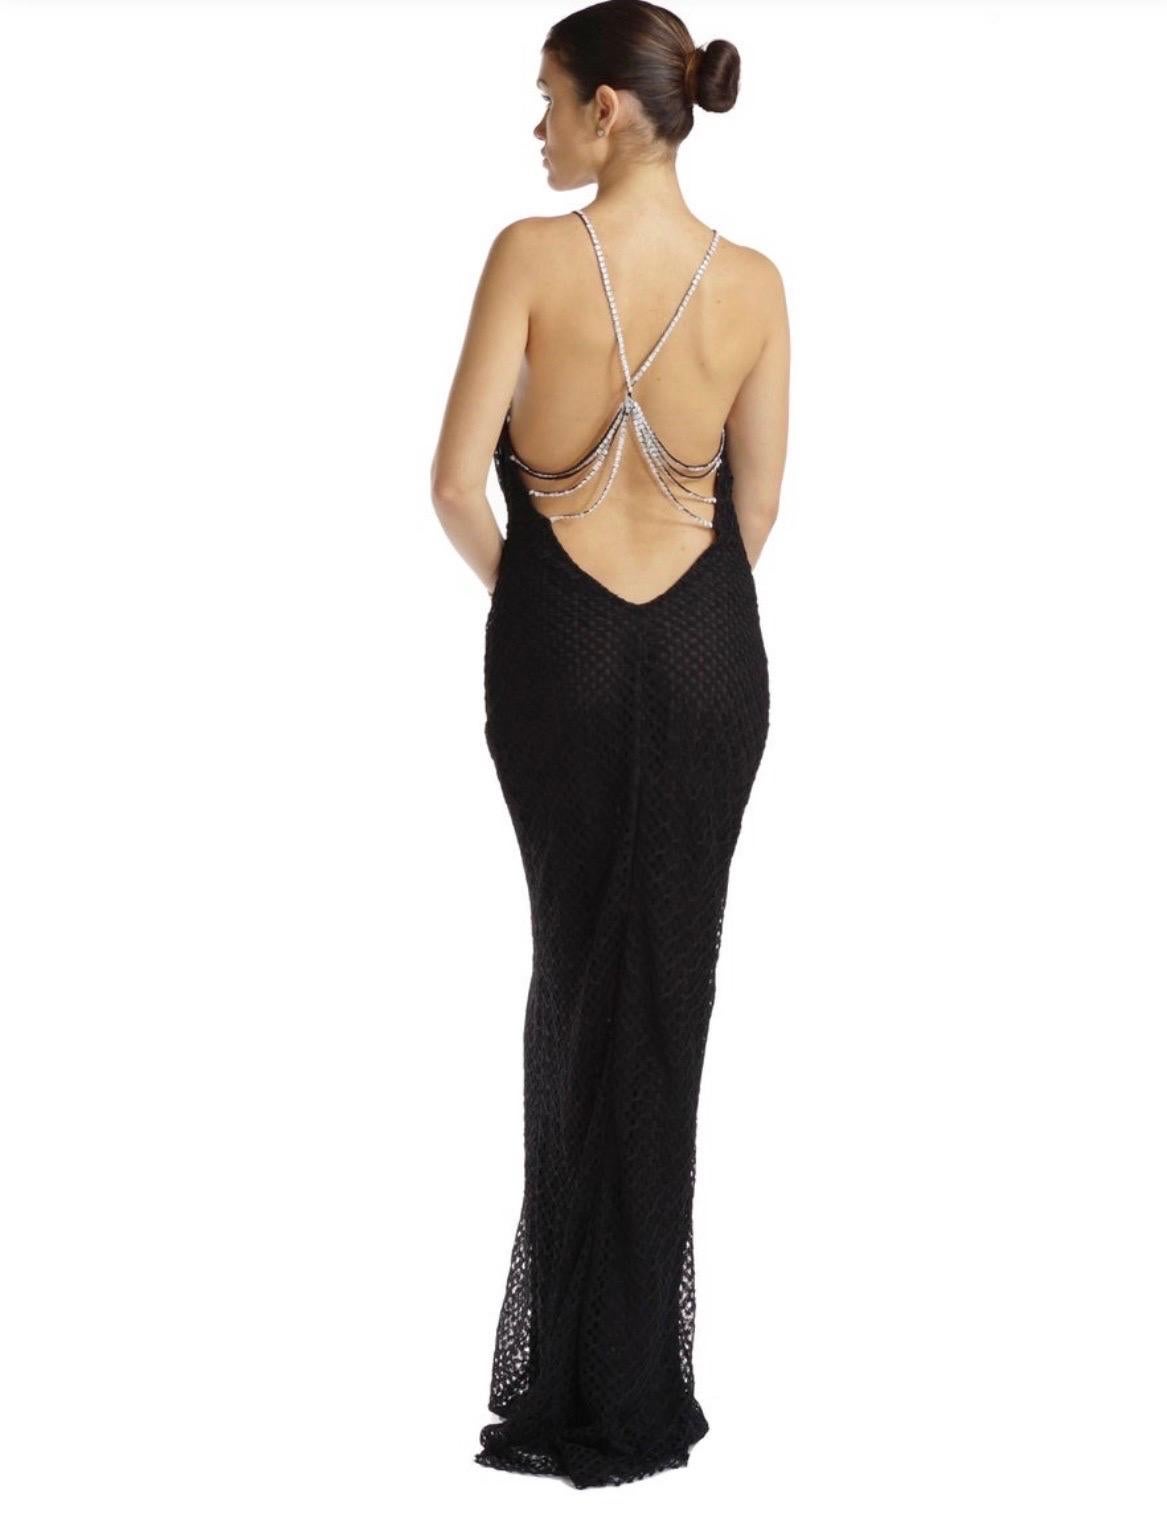 2002 Vintage Gianni Versace Couture
Italian size 46 - US 8-10 (fabric is very stretchy and hugs every curve)
Black Lace Gown with Crystals.
Its totally romantic, stunningly beautiful, certainly feminine and incredibly sexy.
Chiffon silk lining with